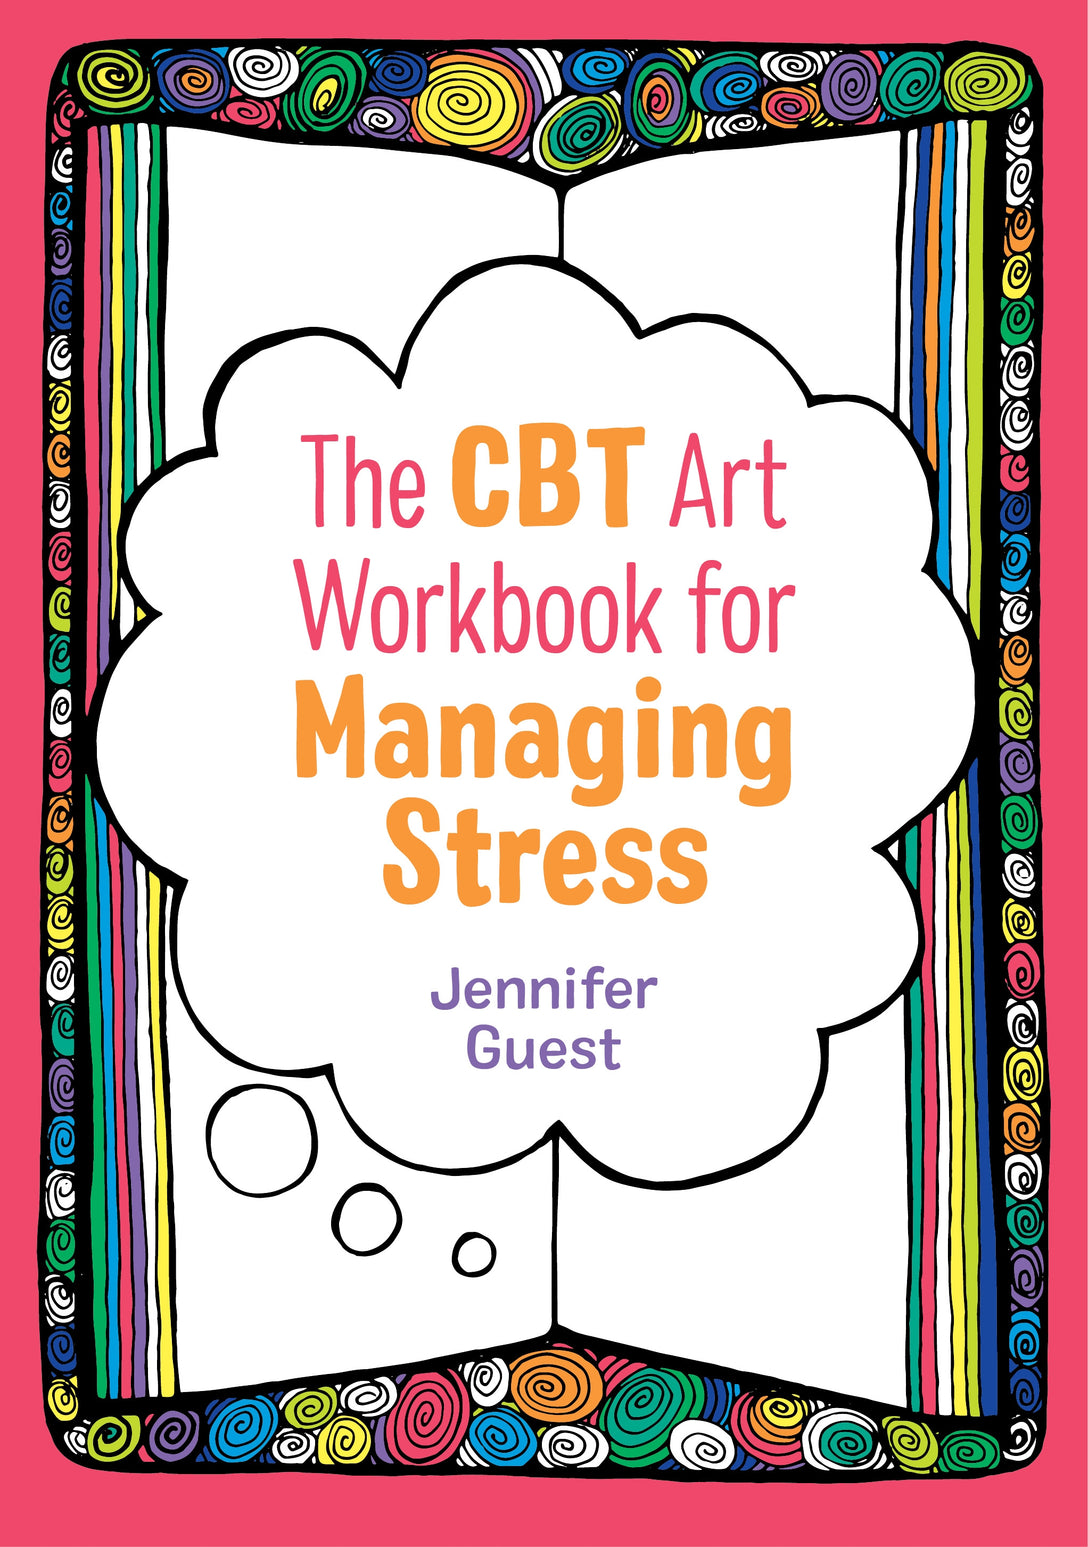 The CBT Art Workbook for Managing Stress by Jennifer Guest